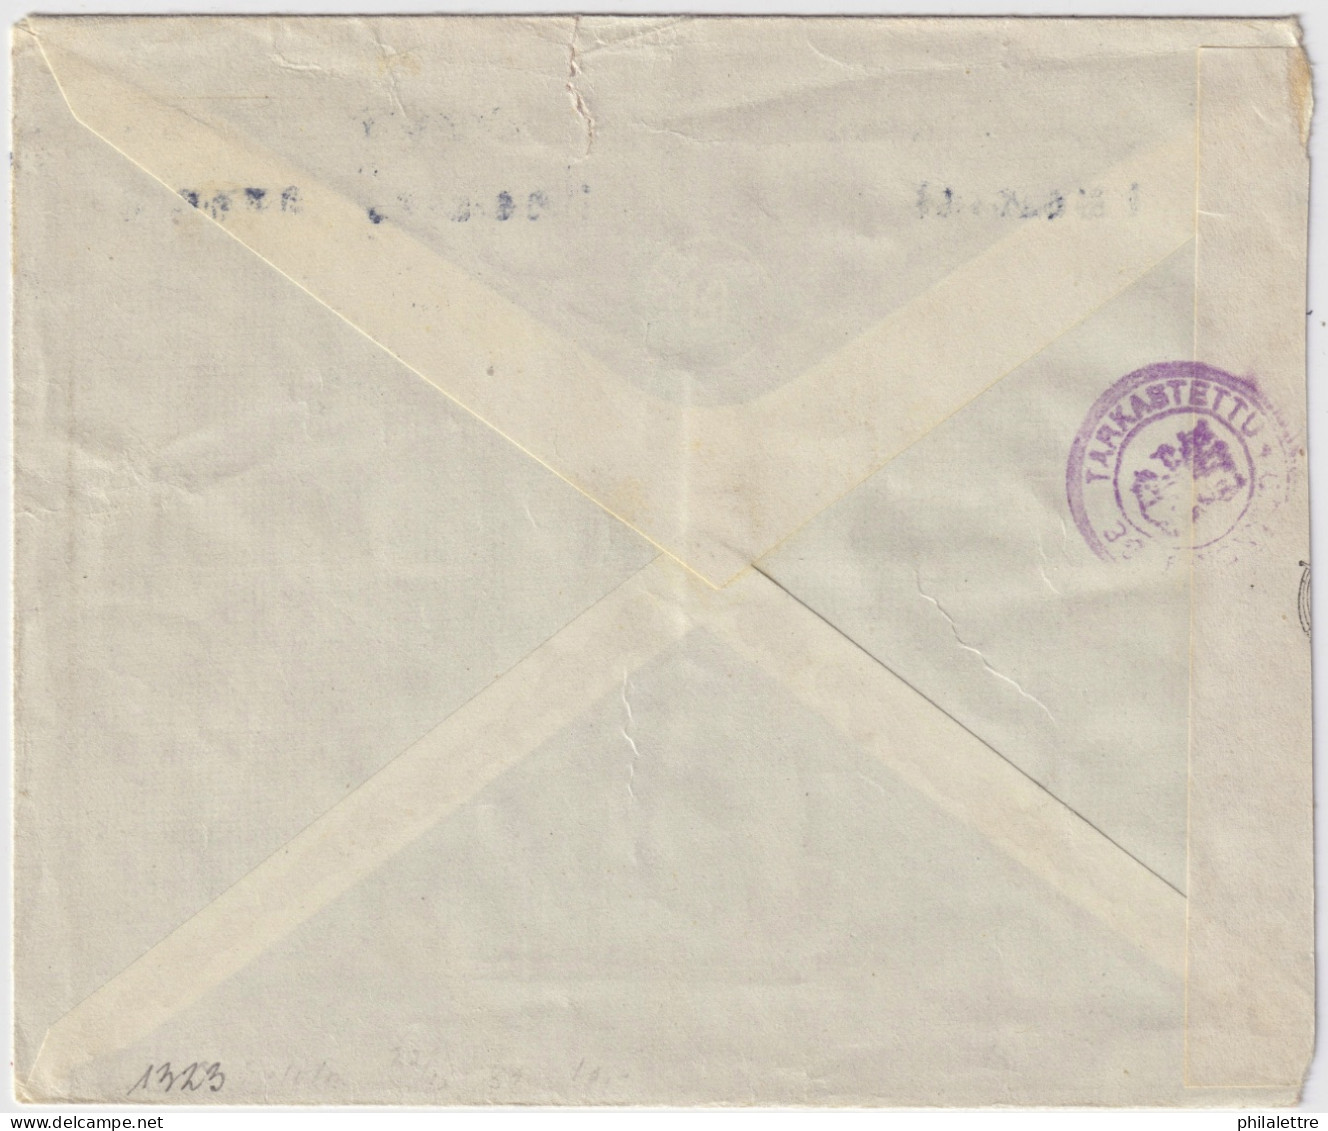 FINLAND - 1945 - Facit F287 3.50M Douglas DC-2 On Censored Cover From Helsinki To Motala, Sweden - Covers & Documents